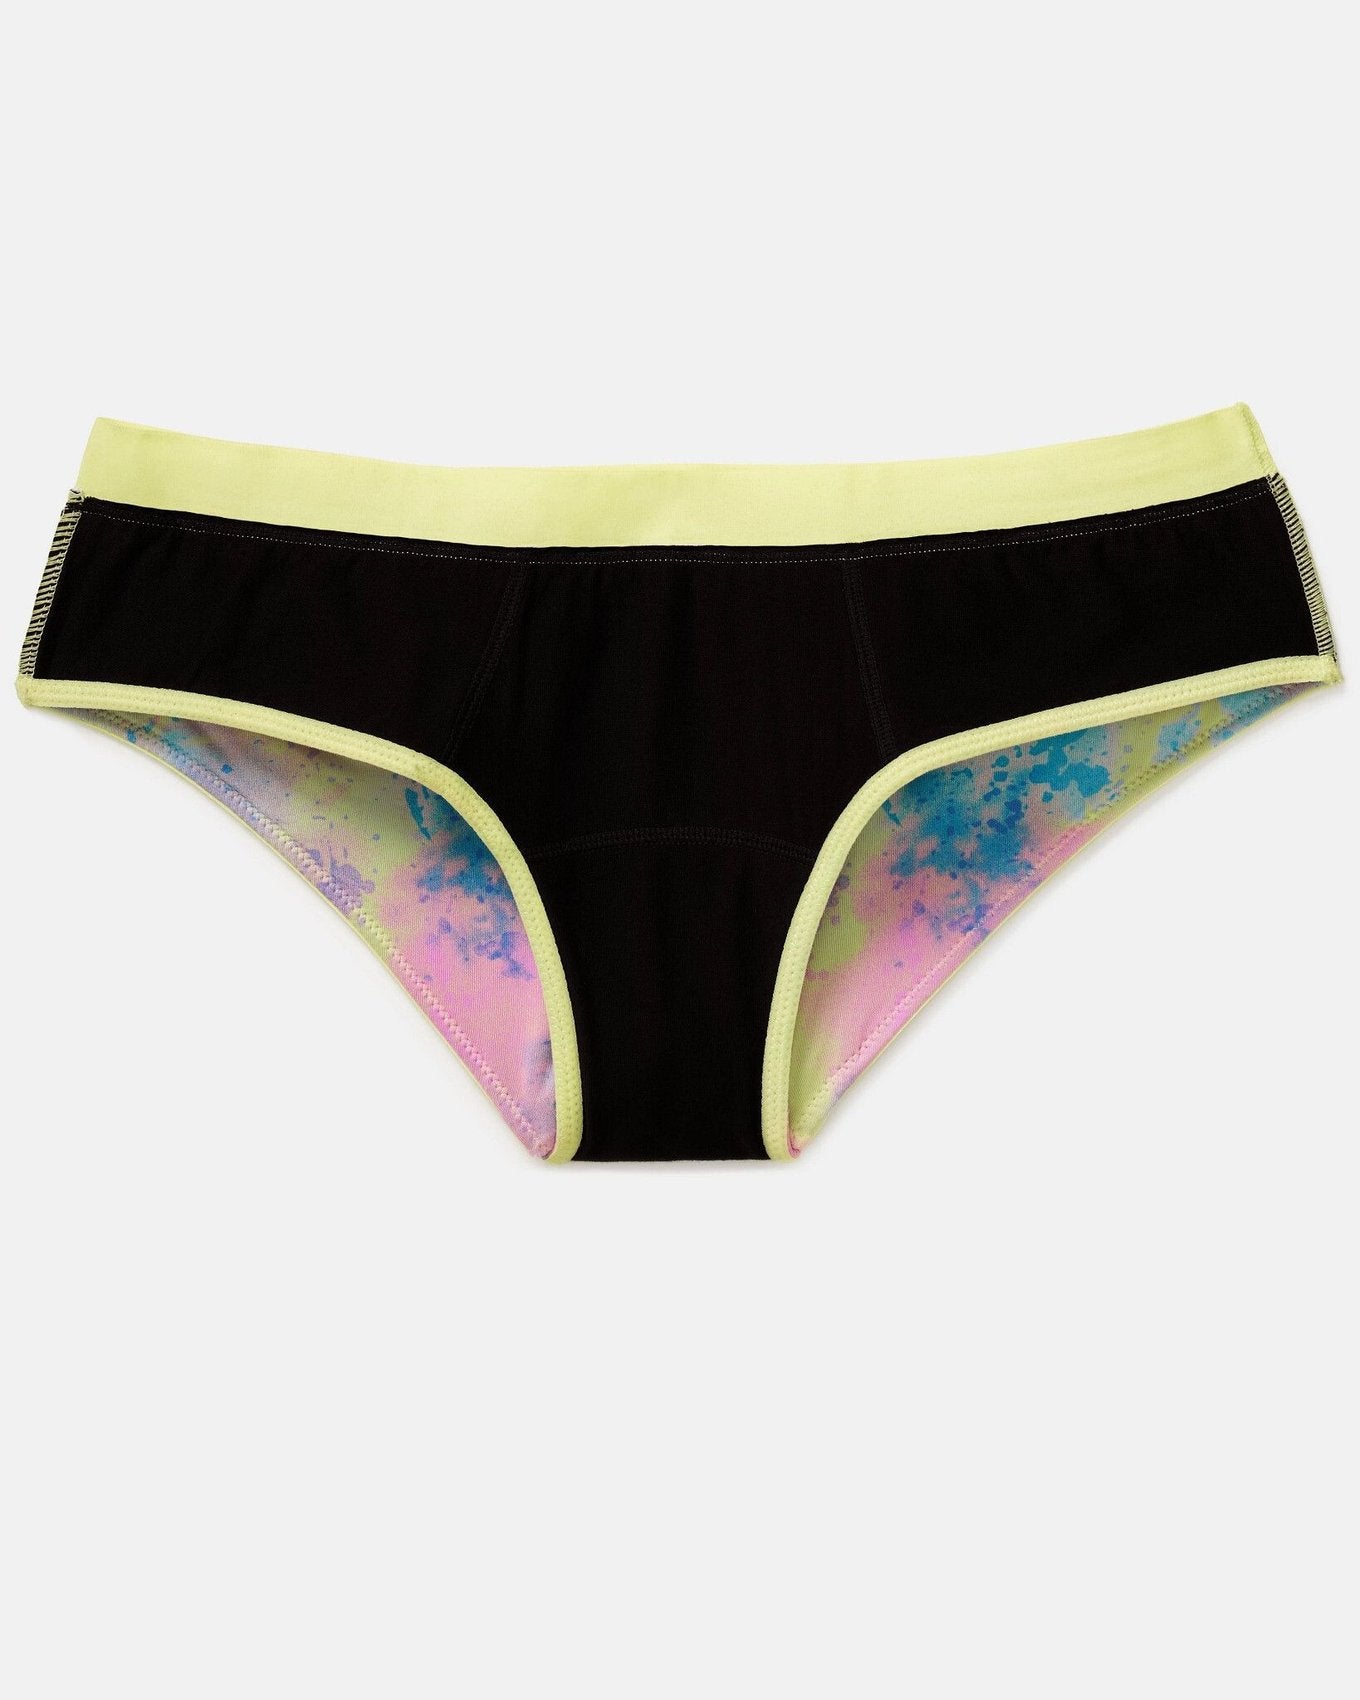 Joyja Cindy period-proof panty in color Melted Tie Dye C02 and shape cheeky